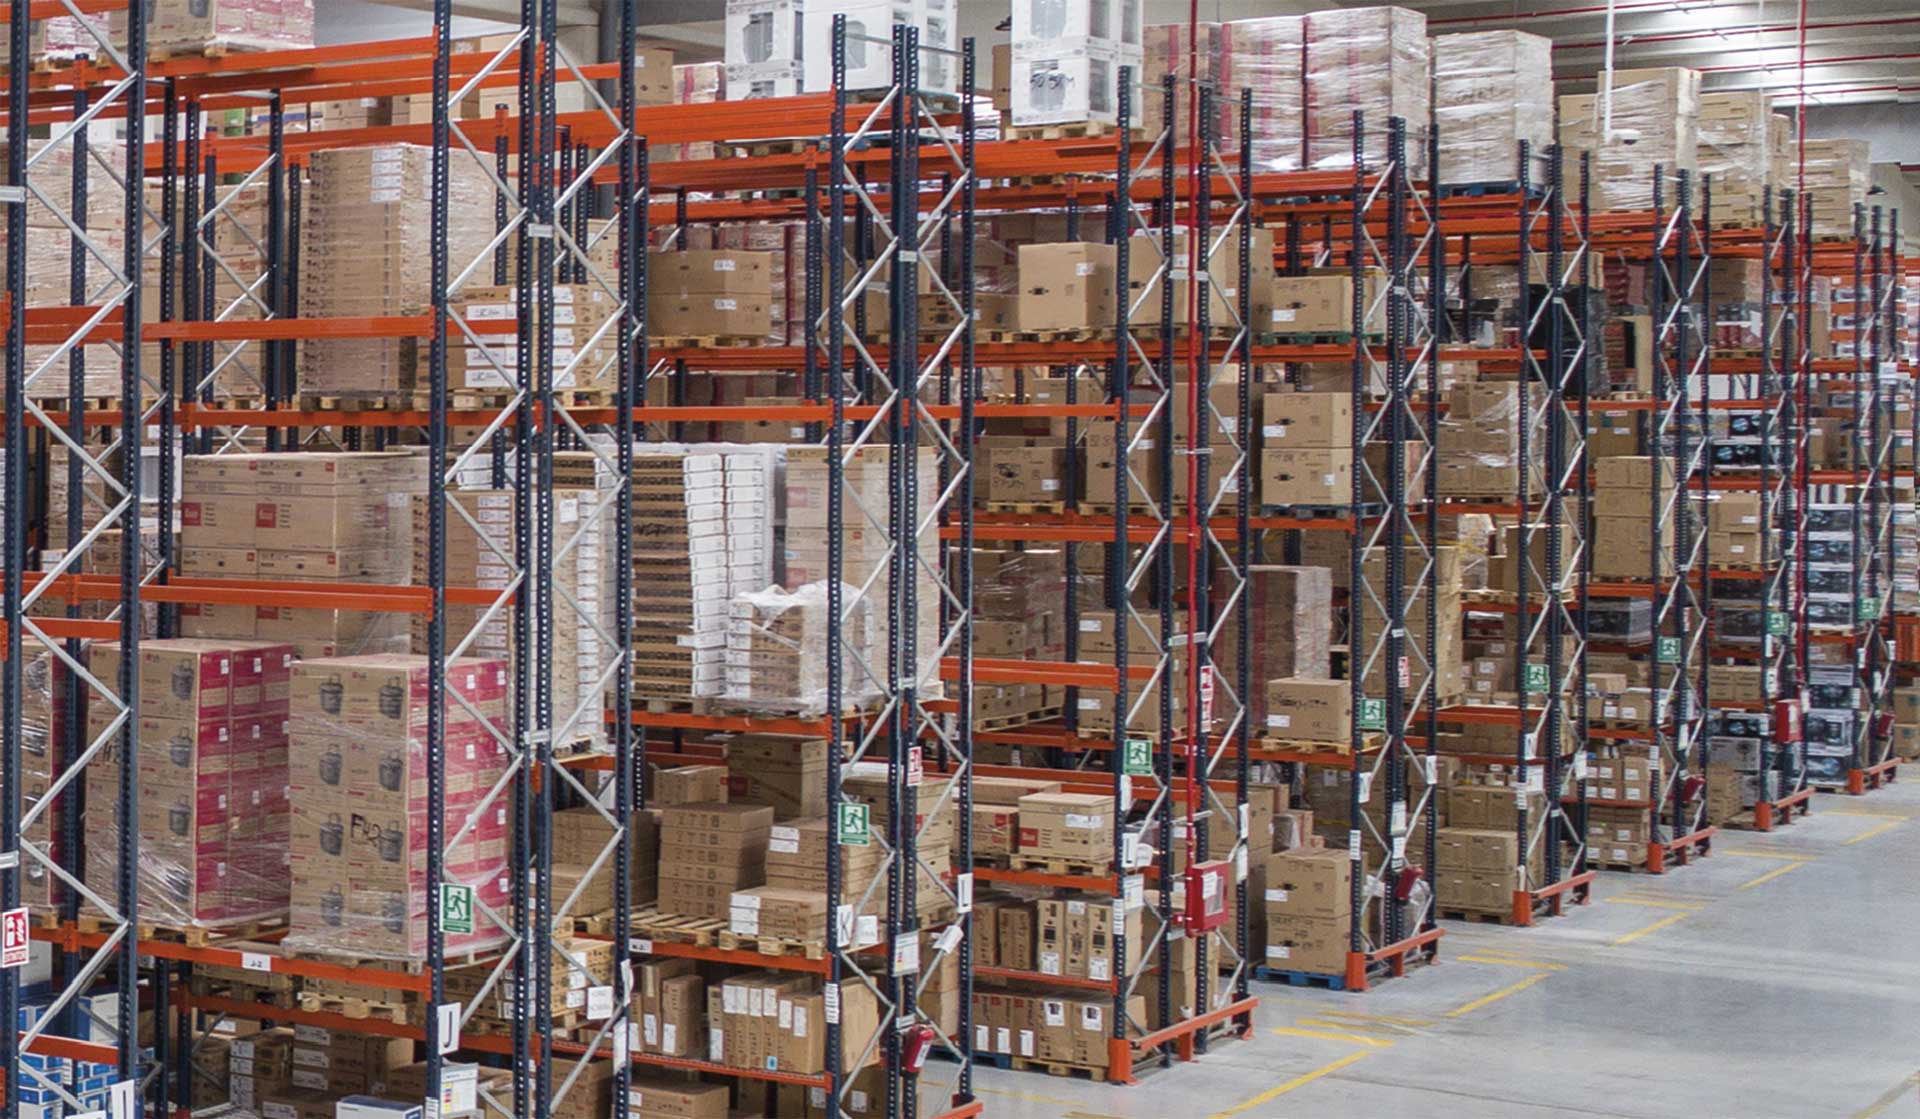 Knowing the most common logistics issues occurring in warehouses is crucial for having an efficient supply chain